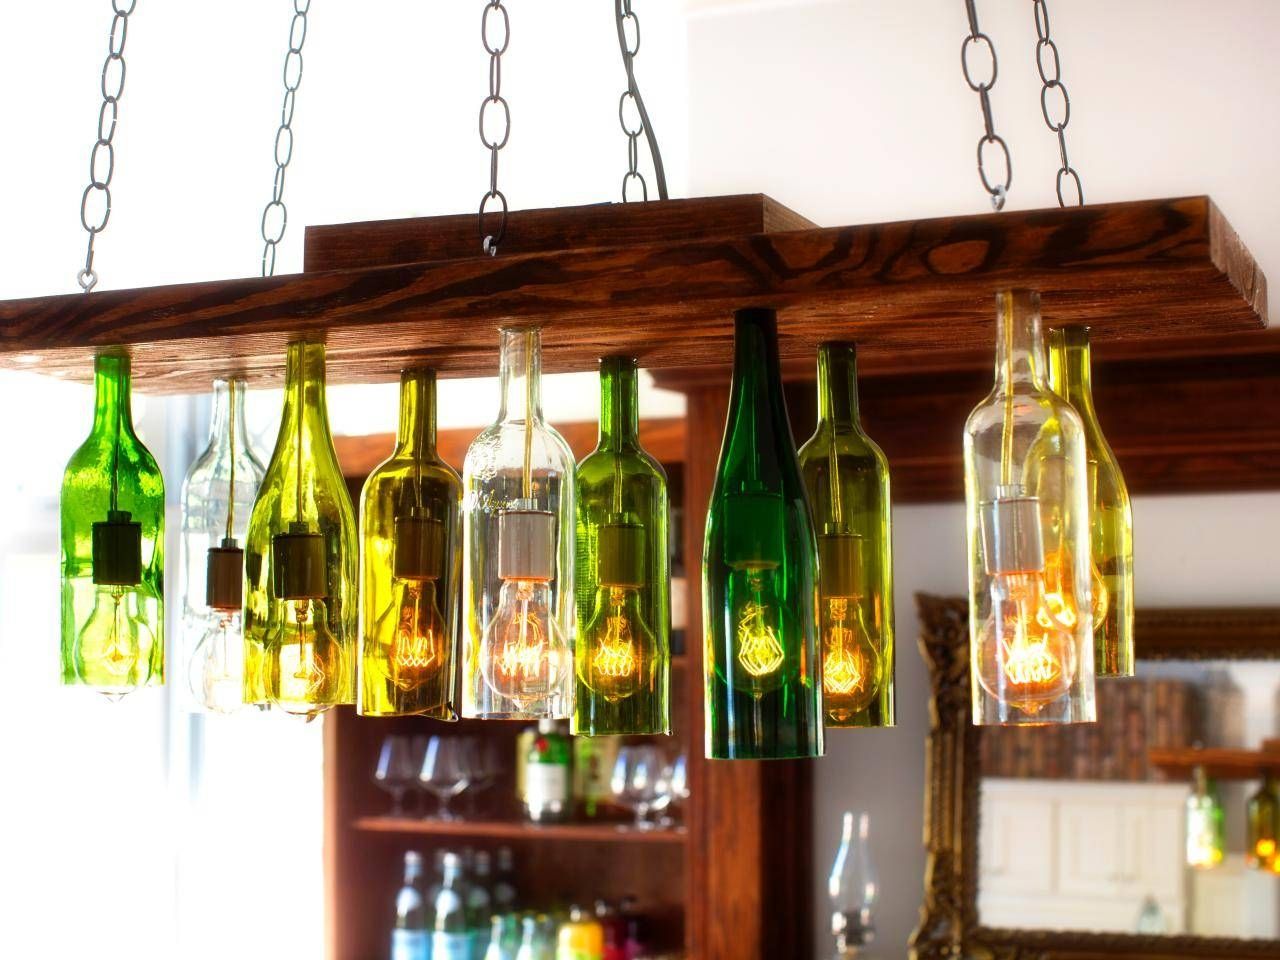 How To Make A Chandelier From Old Wine Bottles | How Tos | Diy Intended For Wine Bottle Ceiling Lights (View 8 of 15)